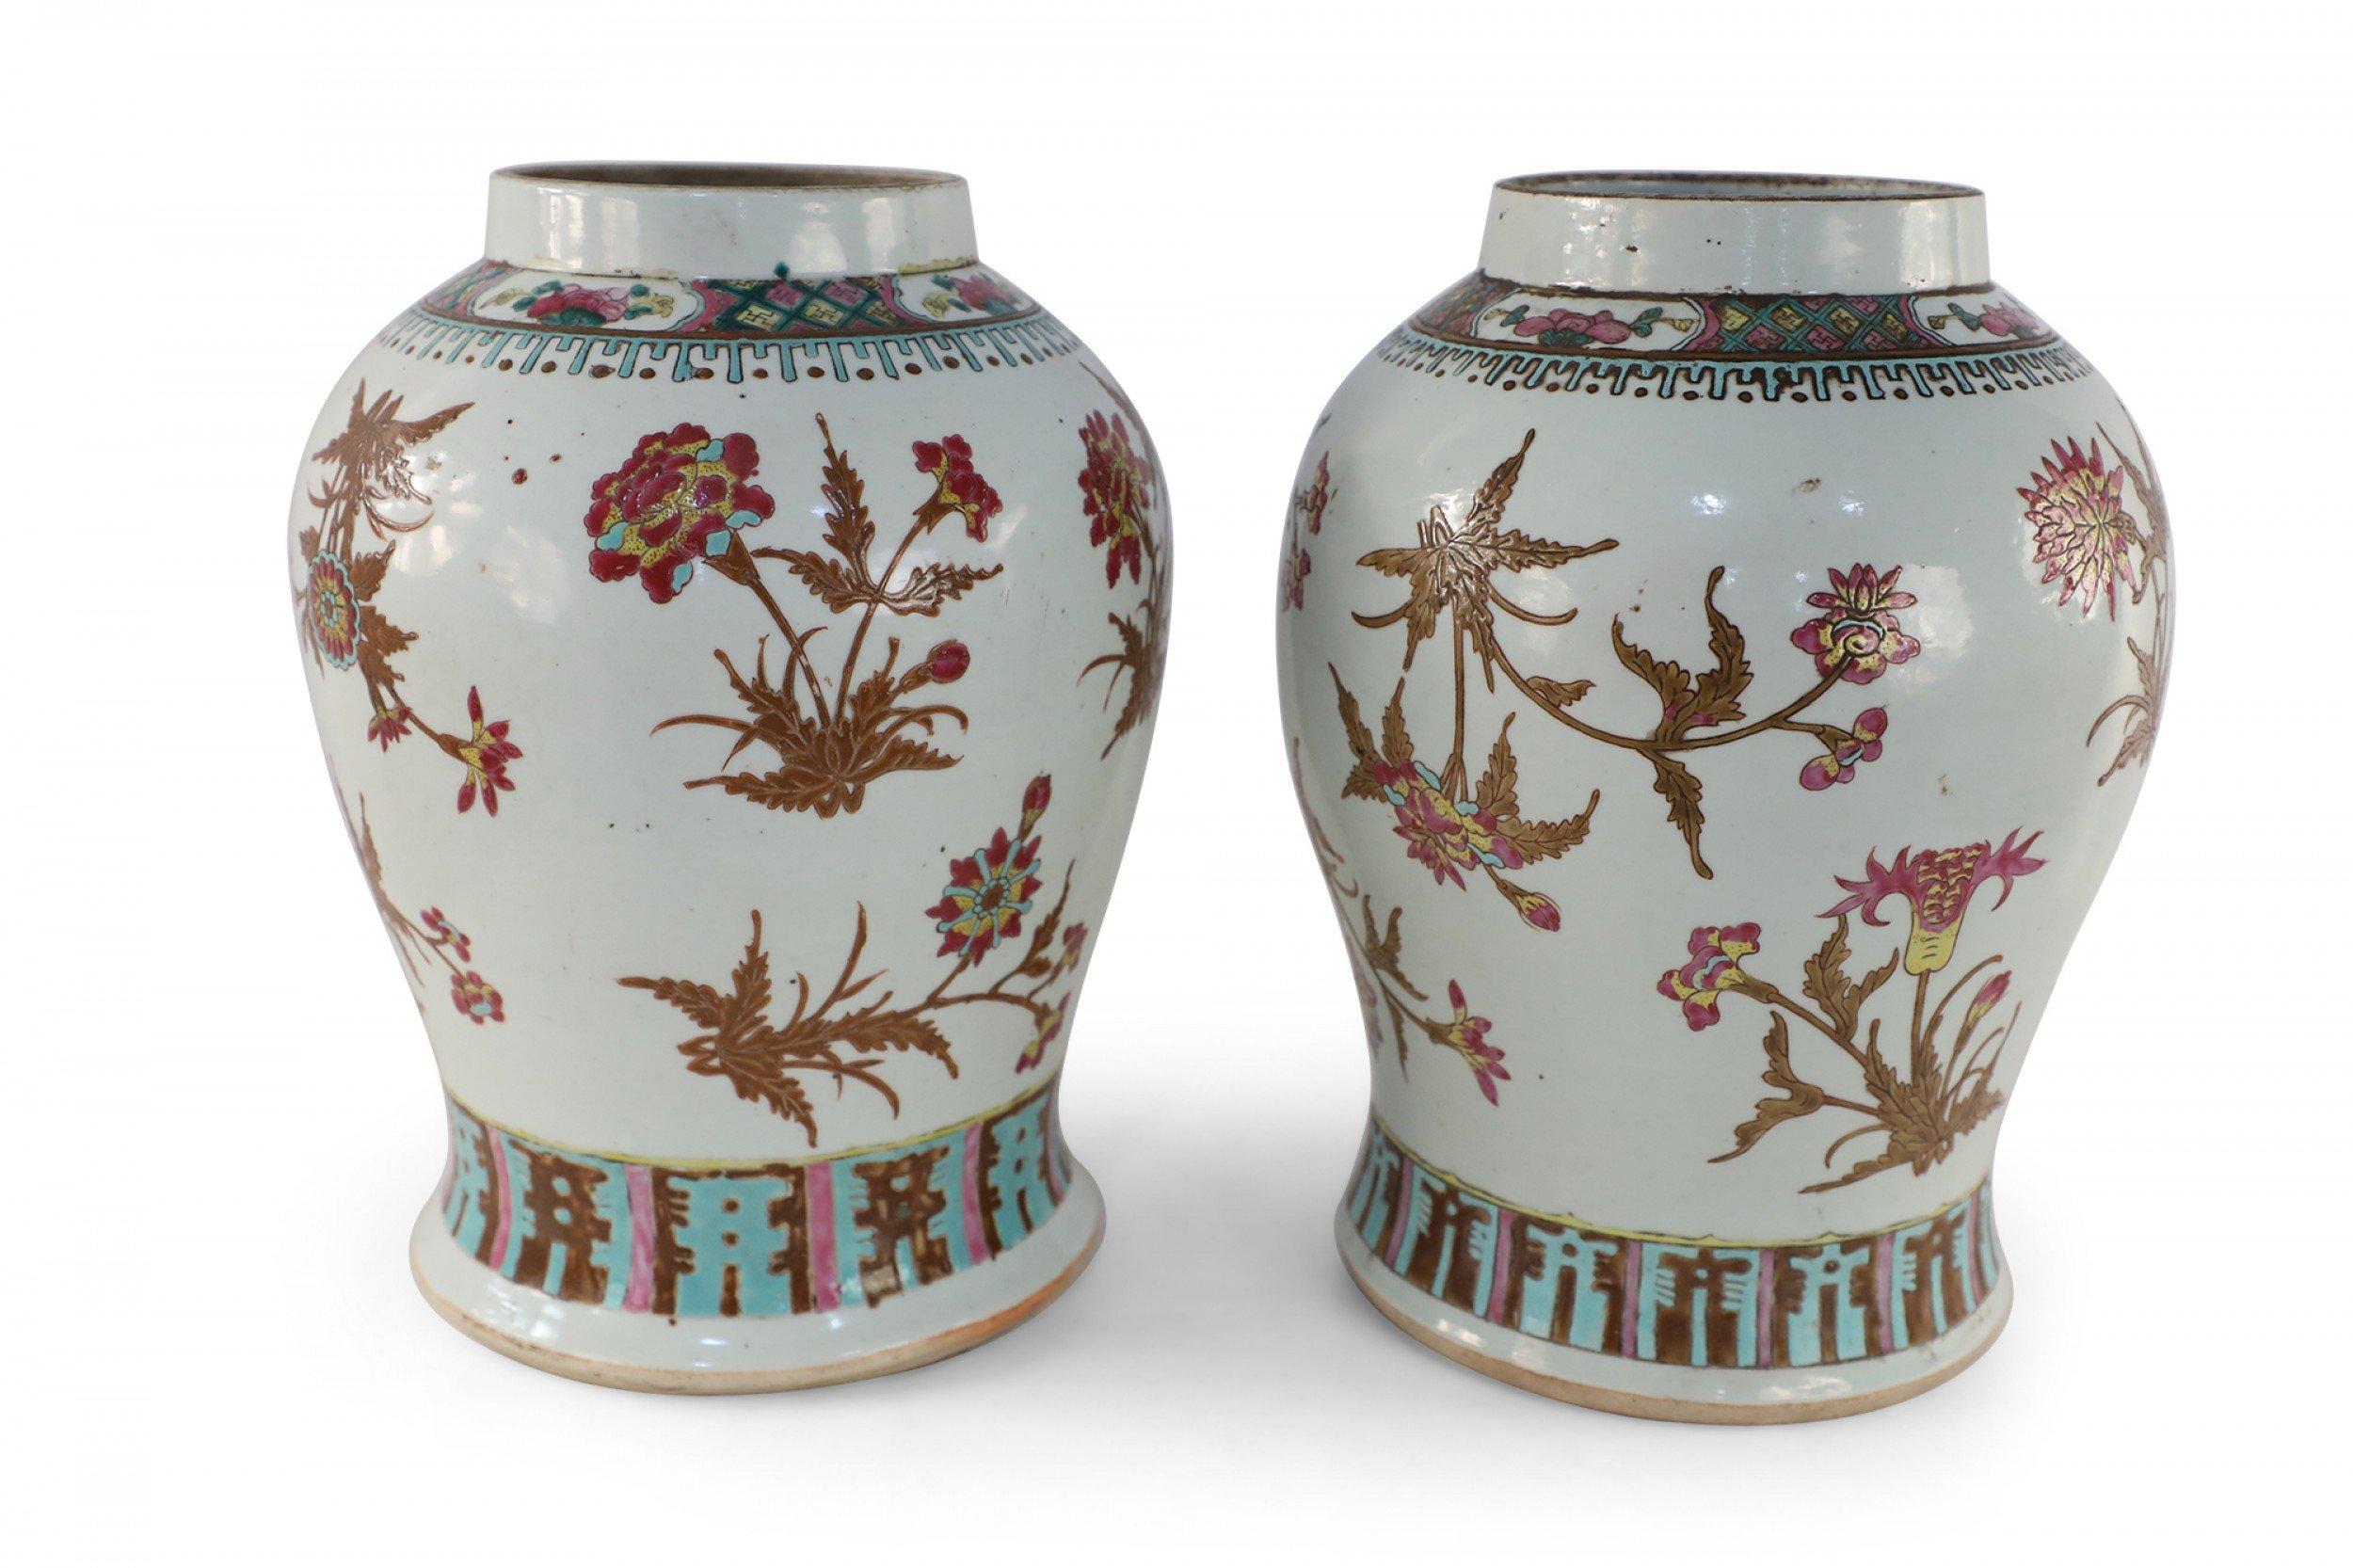 Pair of Chinese White and Maroon Floral Motif Porcelain Vases For Sale 2